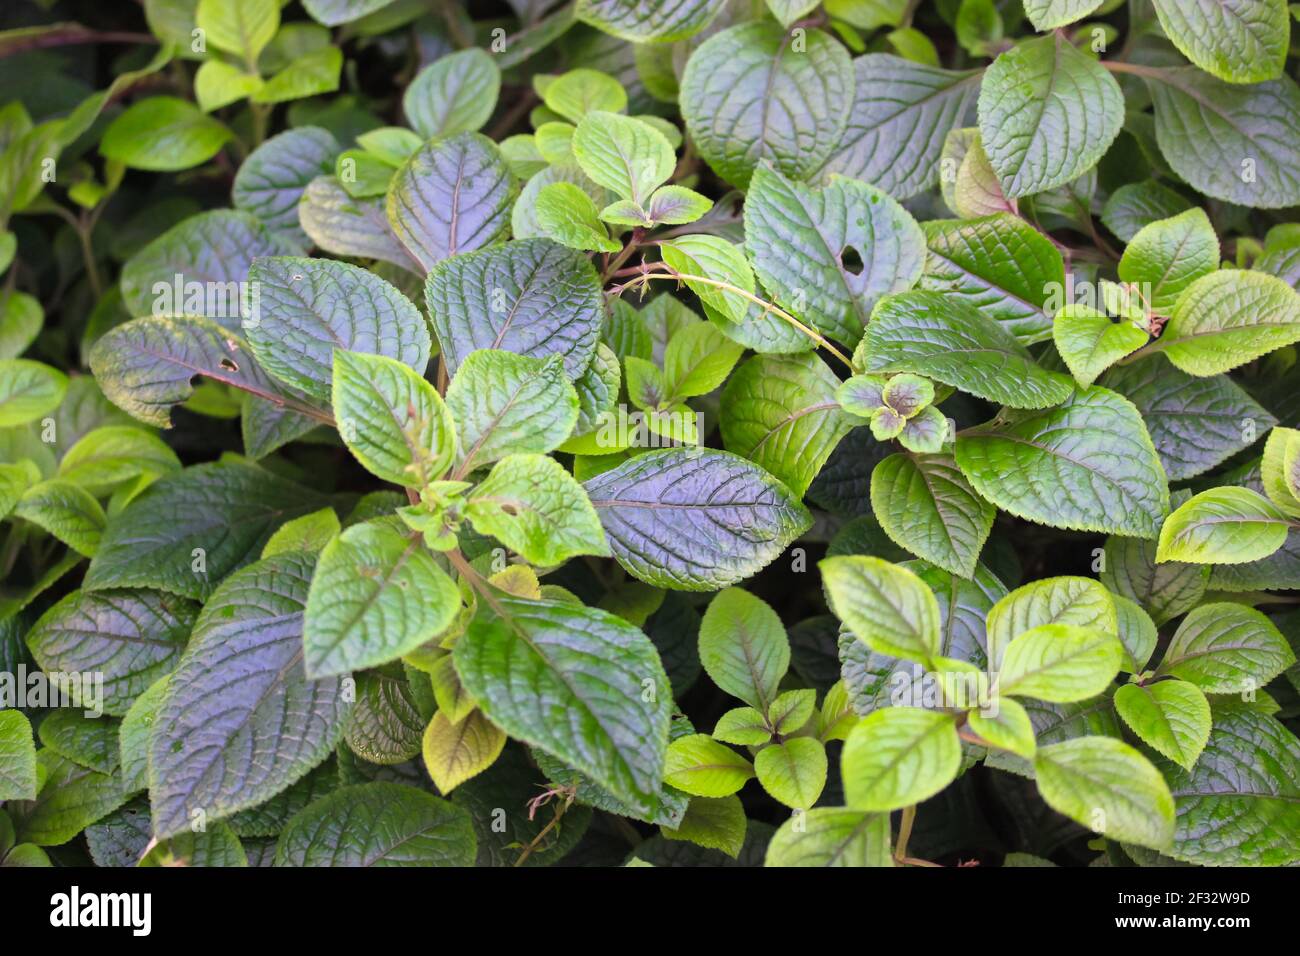 Green leaves of the Melastomataceae plants. Tropical leaves backgrounds and textures. Rondodendron without flowers in the botanical garden. A natural Stock Photo